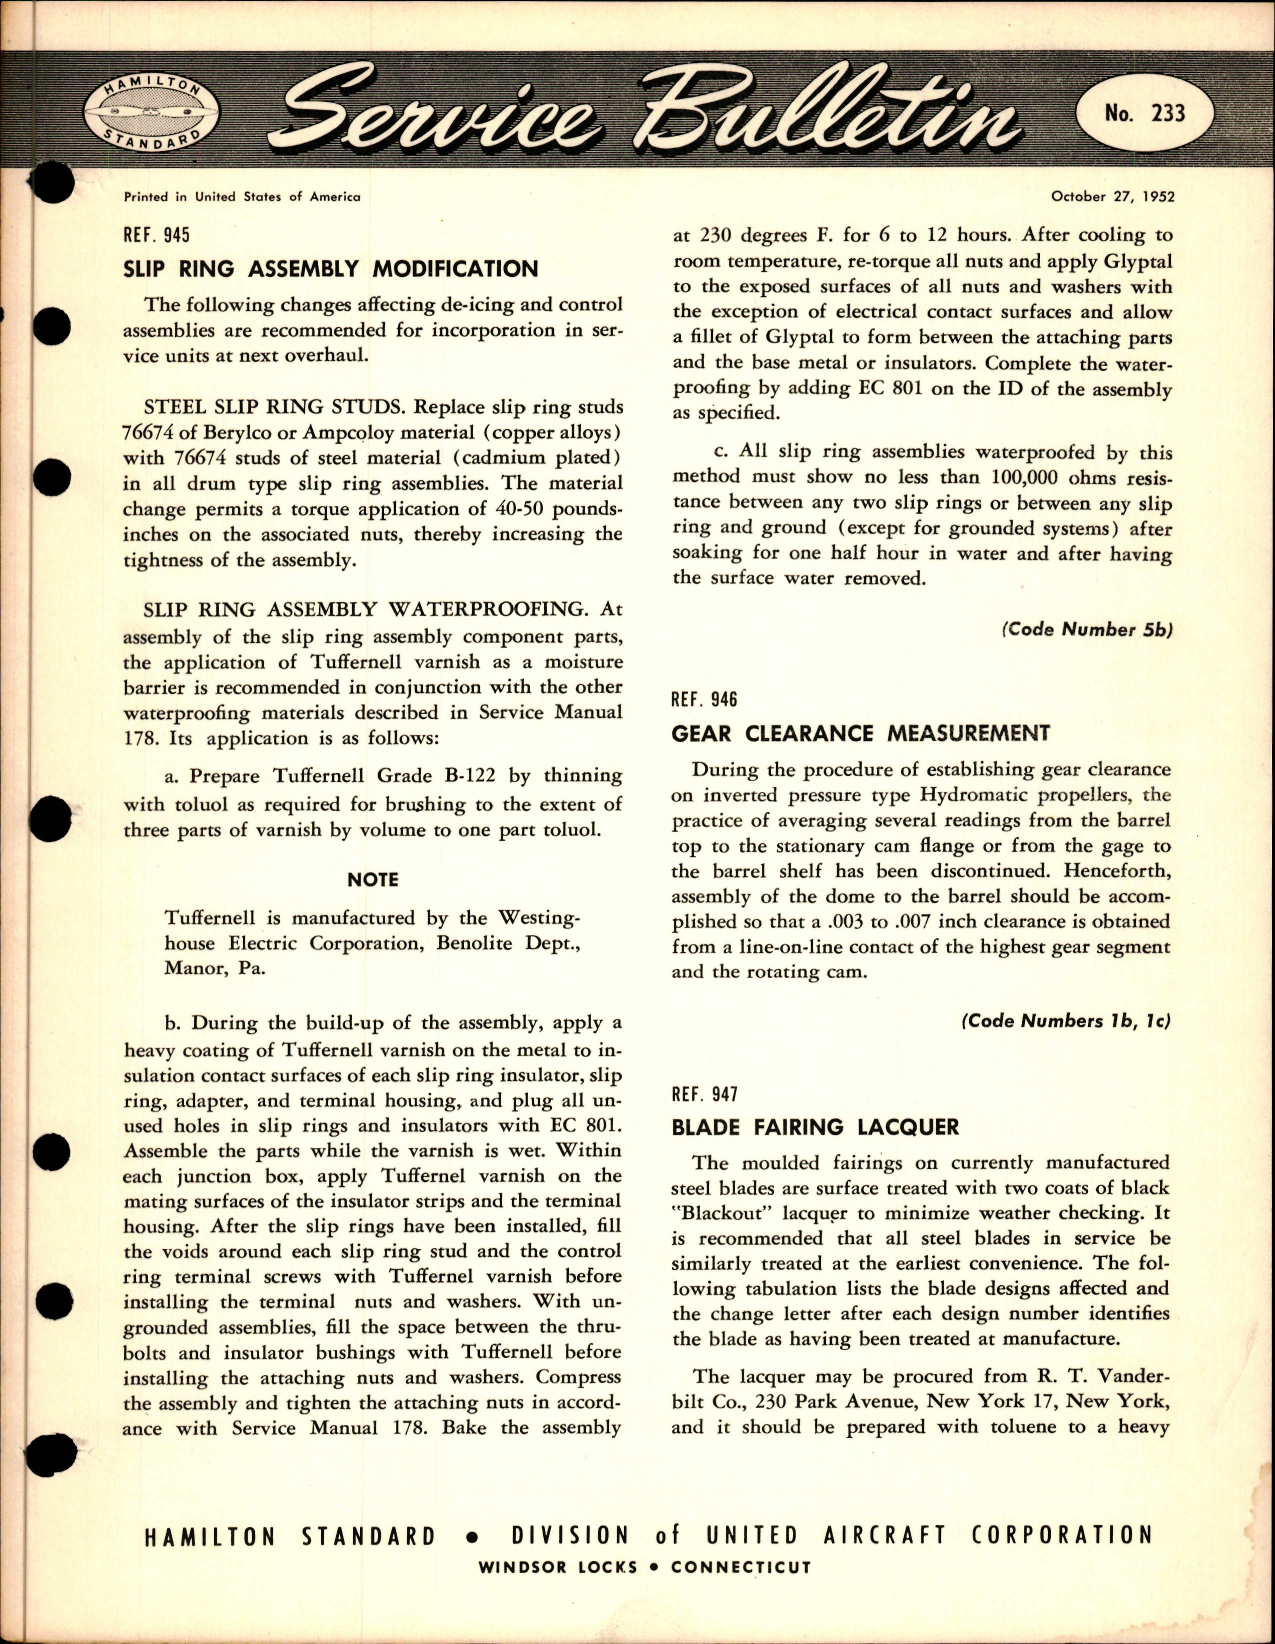 Sample page 1 from AirCorps Library document: Slip Ring Assembly Modification, Ref 945